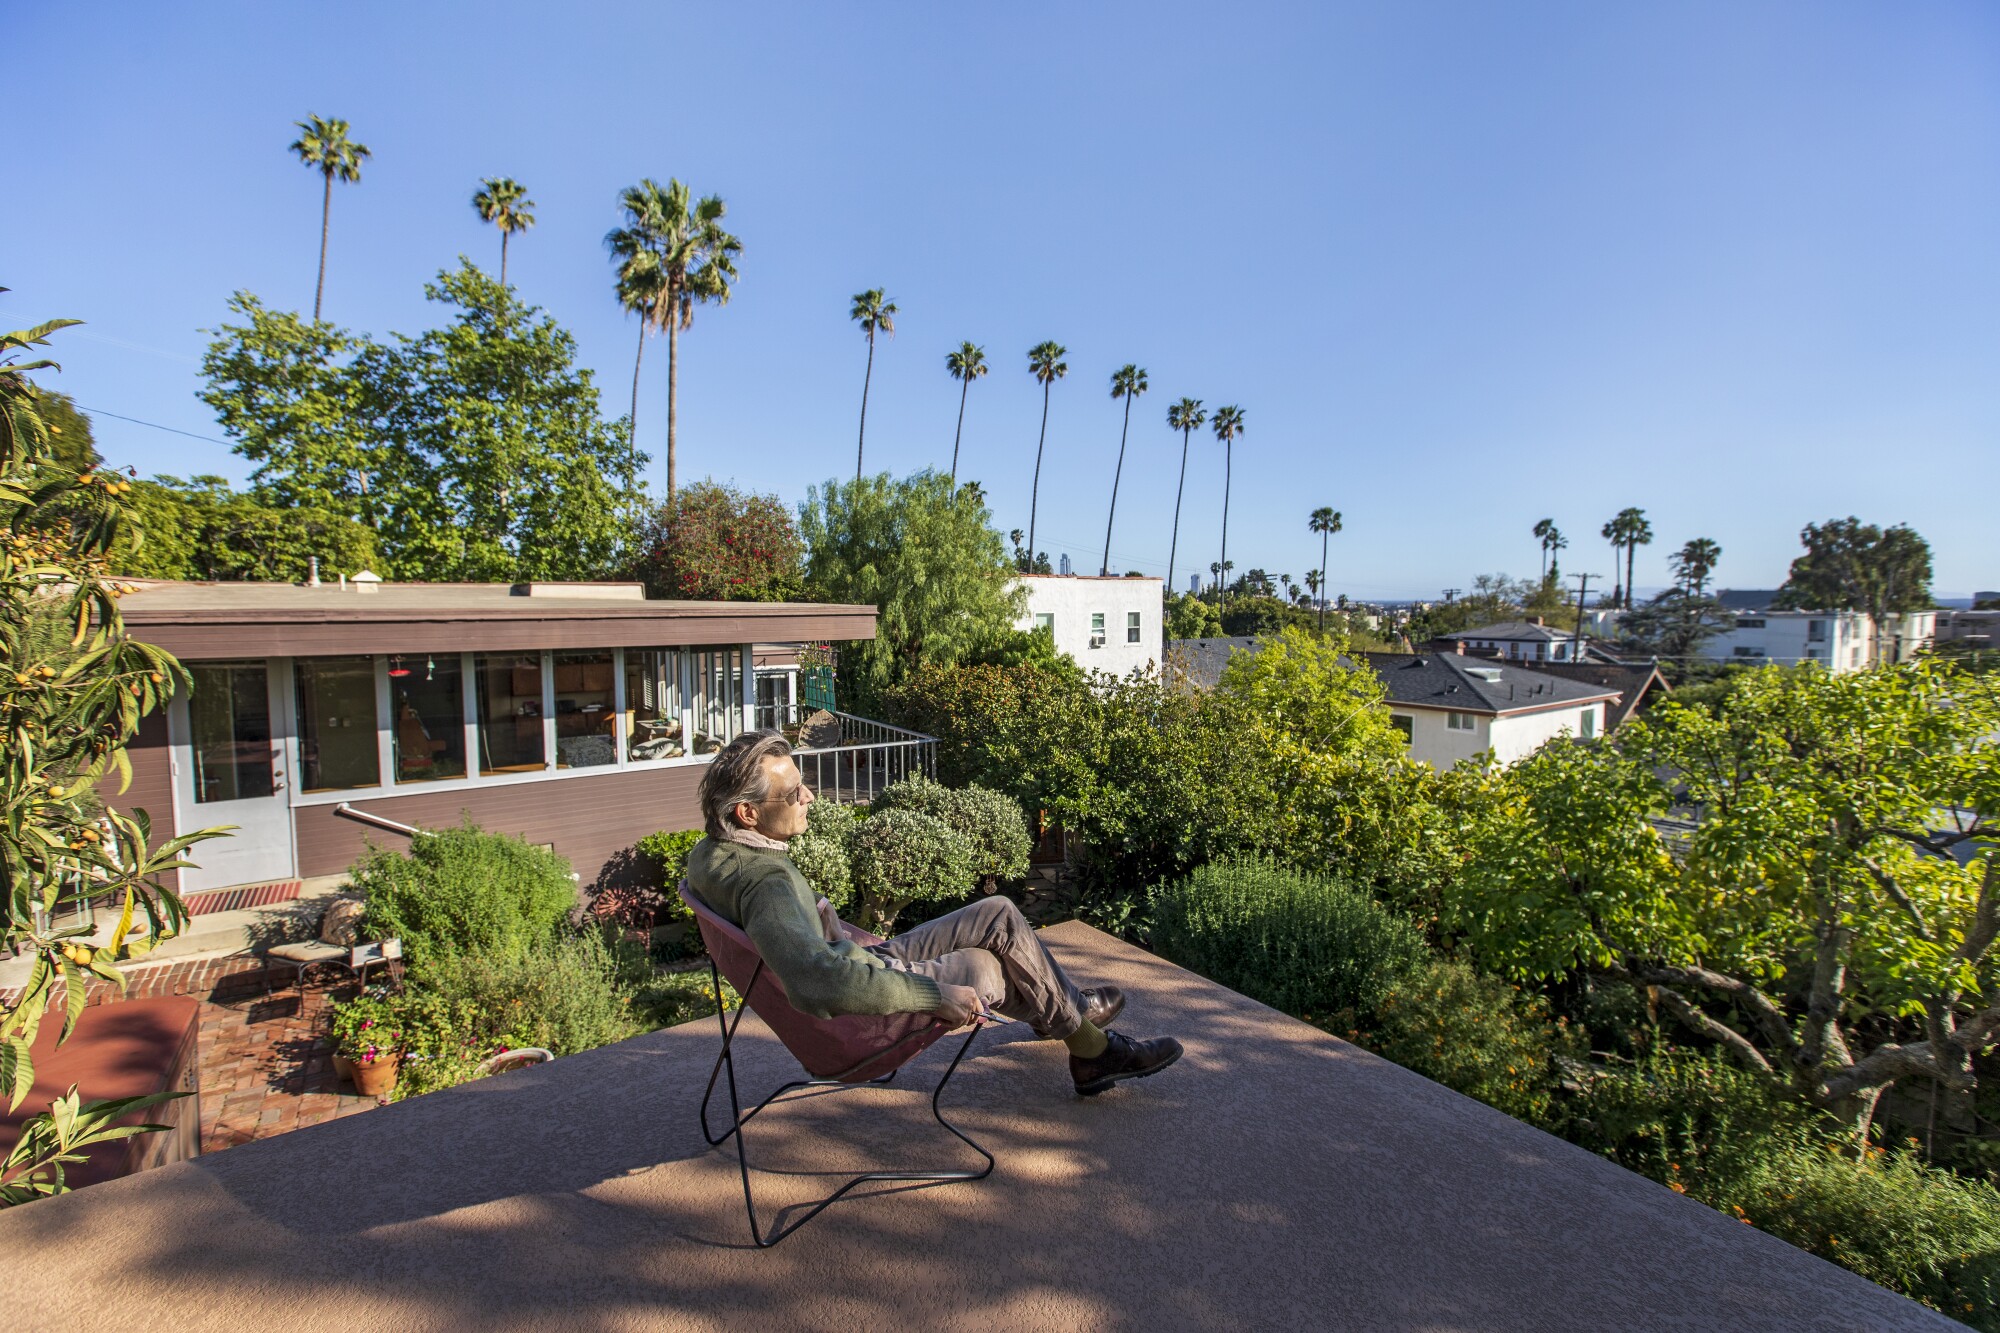 A man sits on a rooftop overlooking palm trees and houses in the distance.